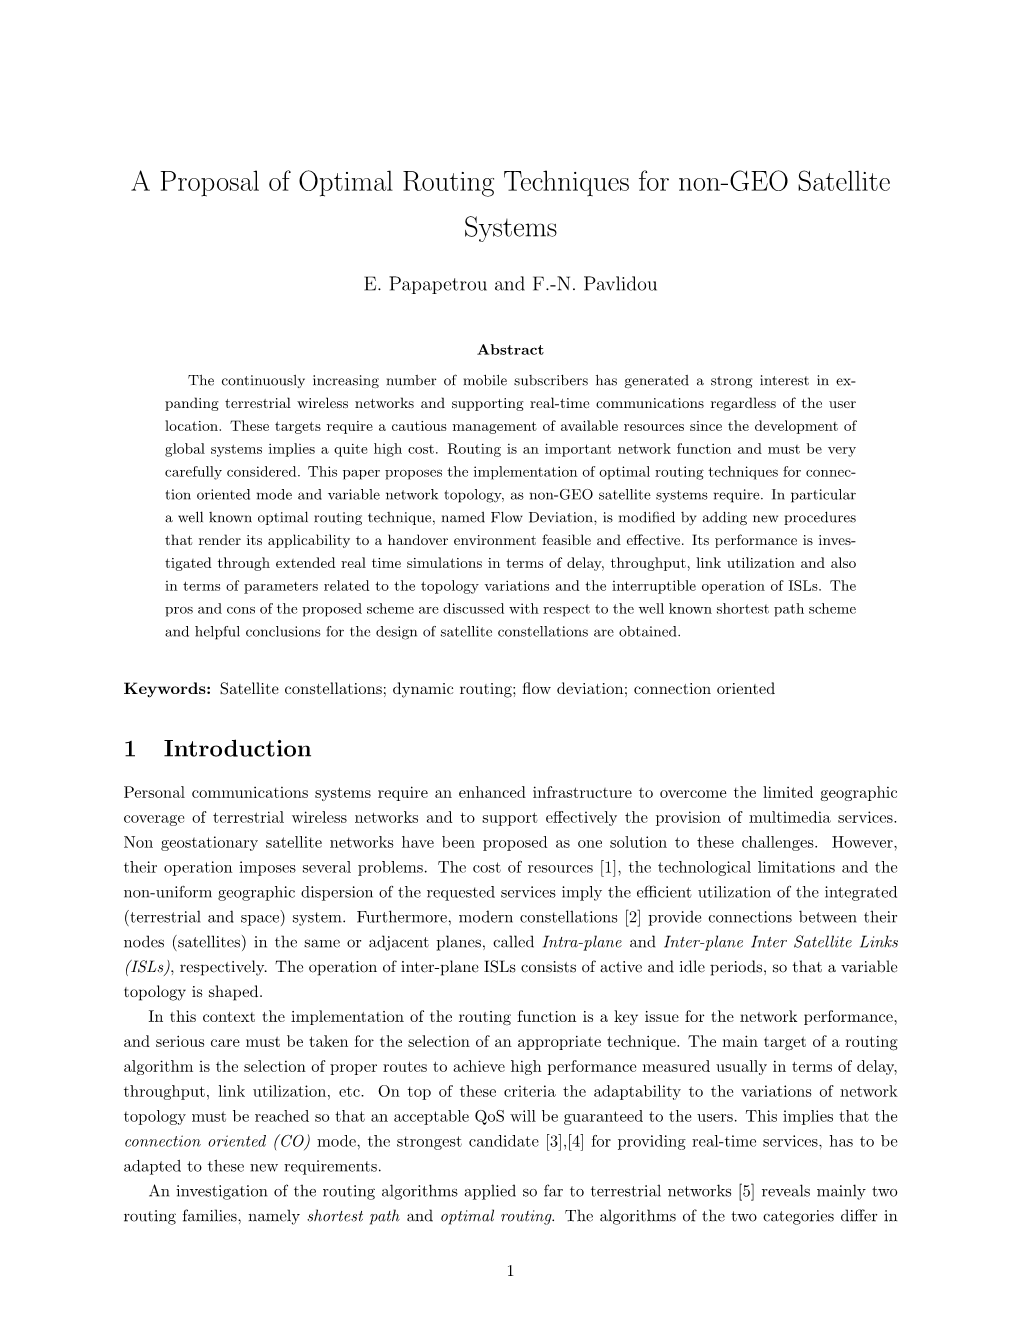 A Proposal of Optimal Routing Techniques for Non-GEO Satellite Systems